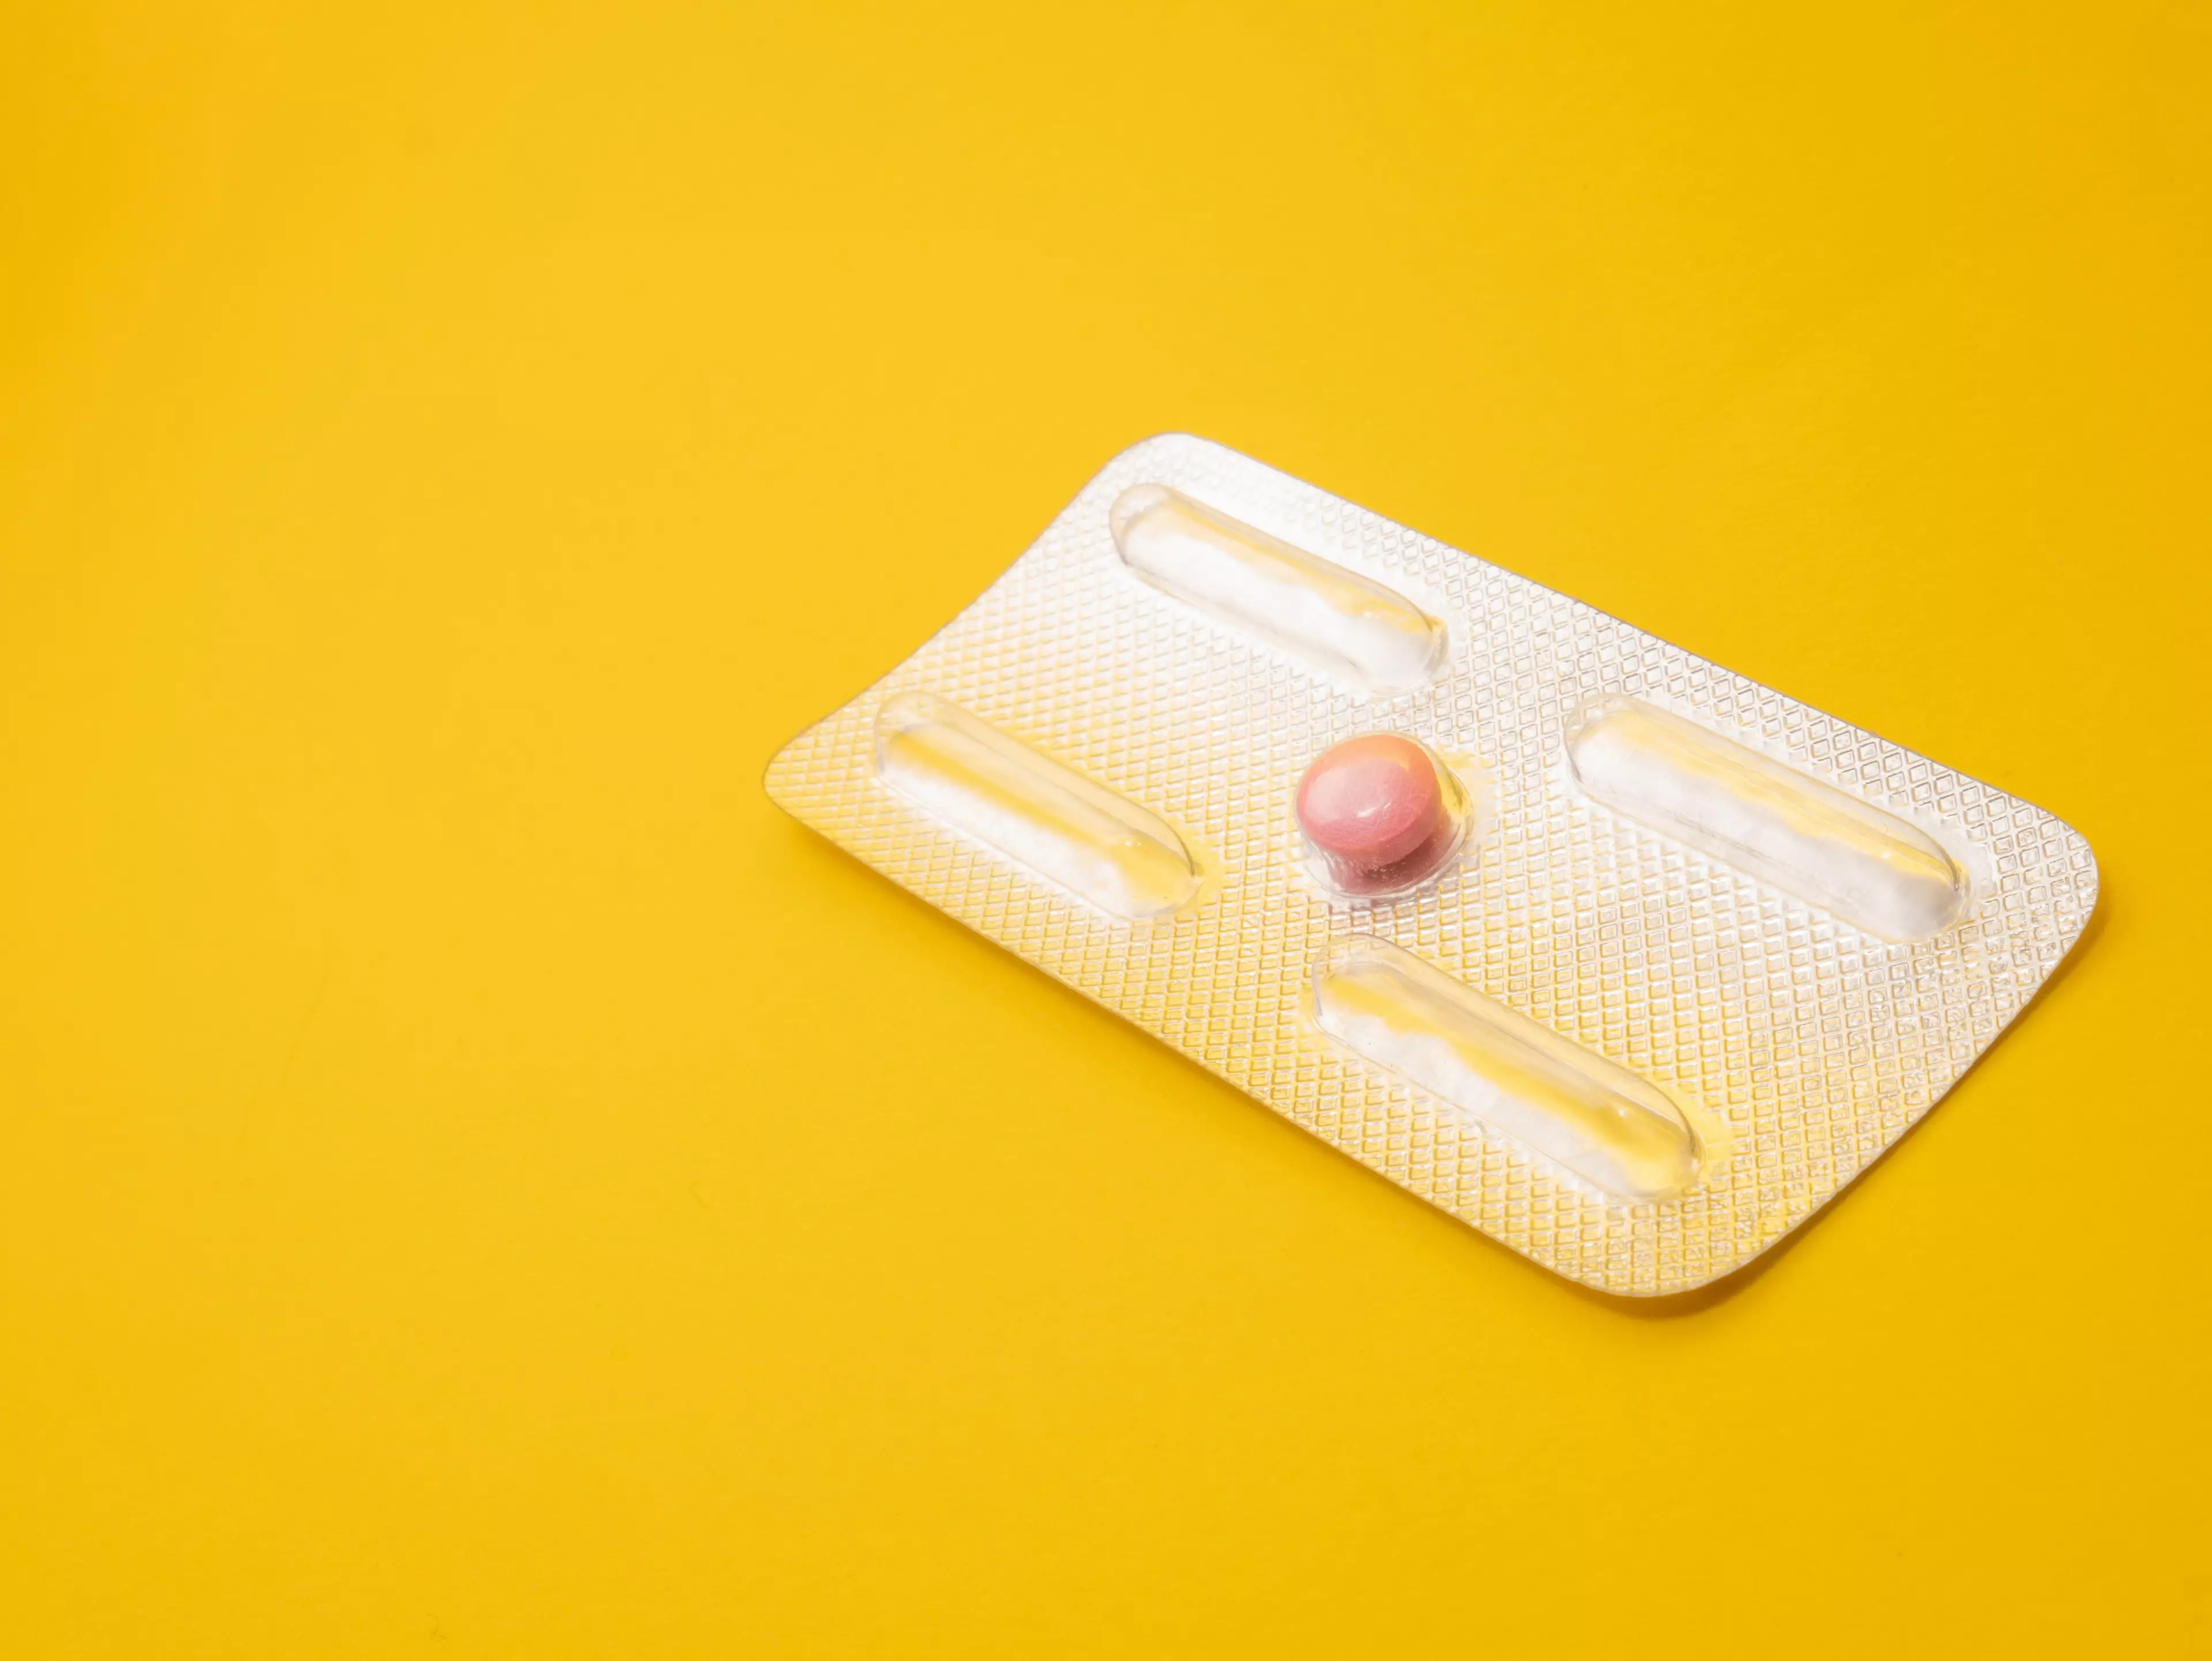 Women will be able to take abortion pills at home if they cannot access a clinic (